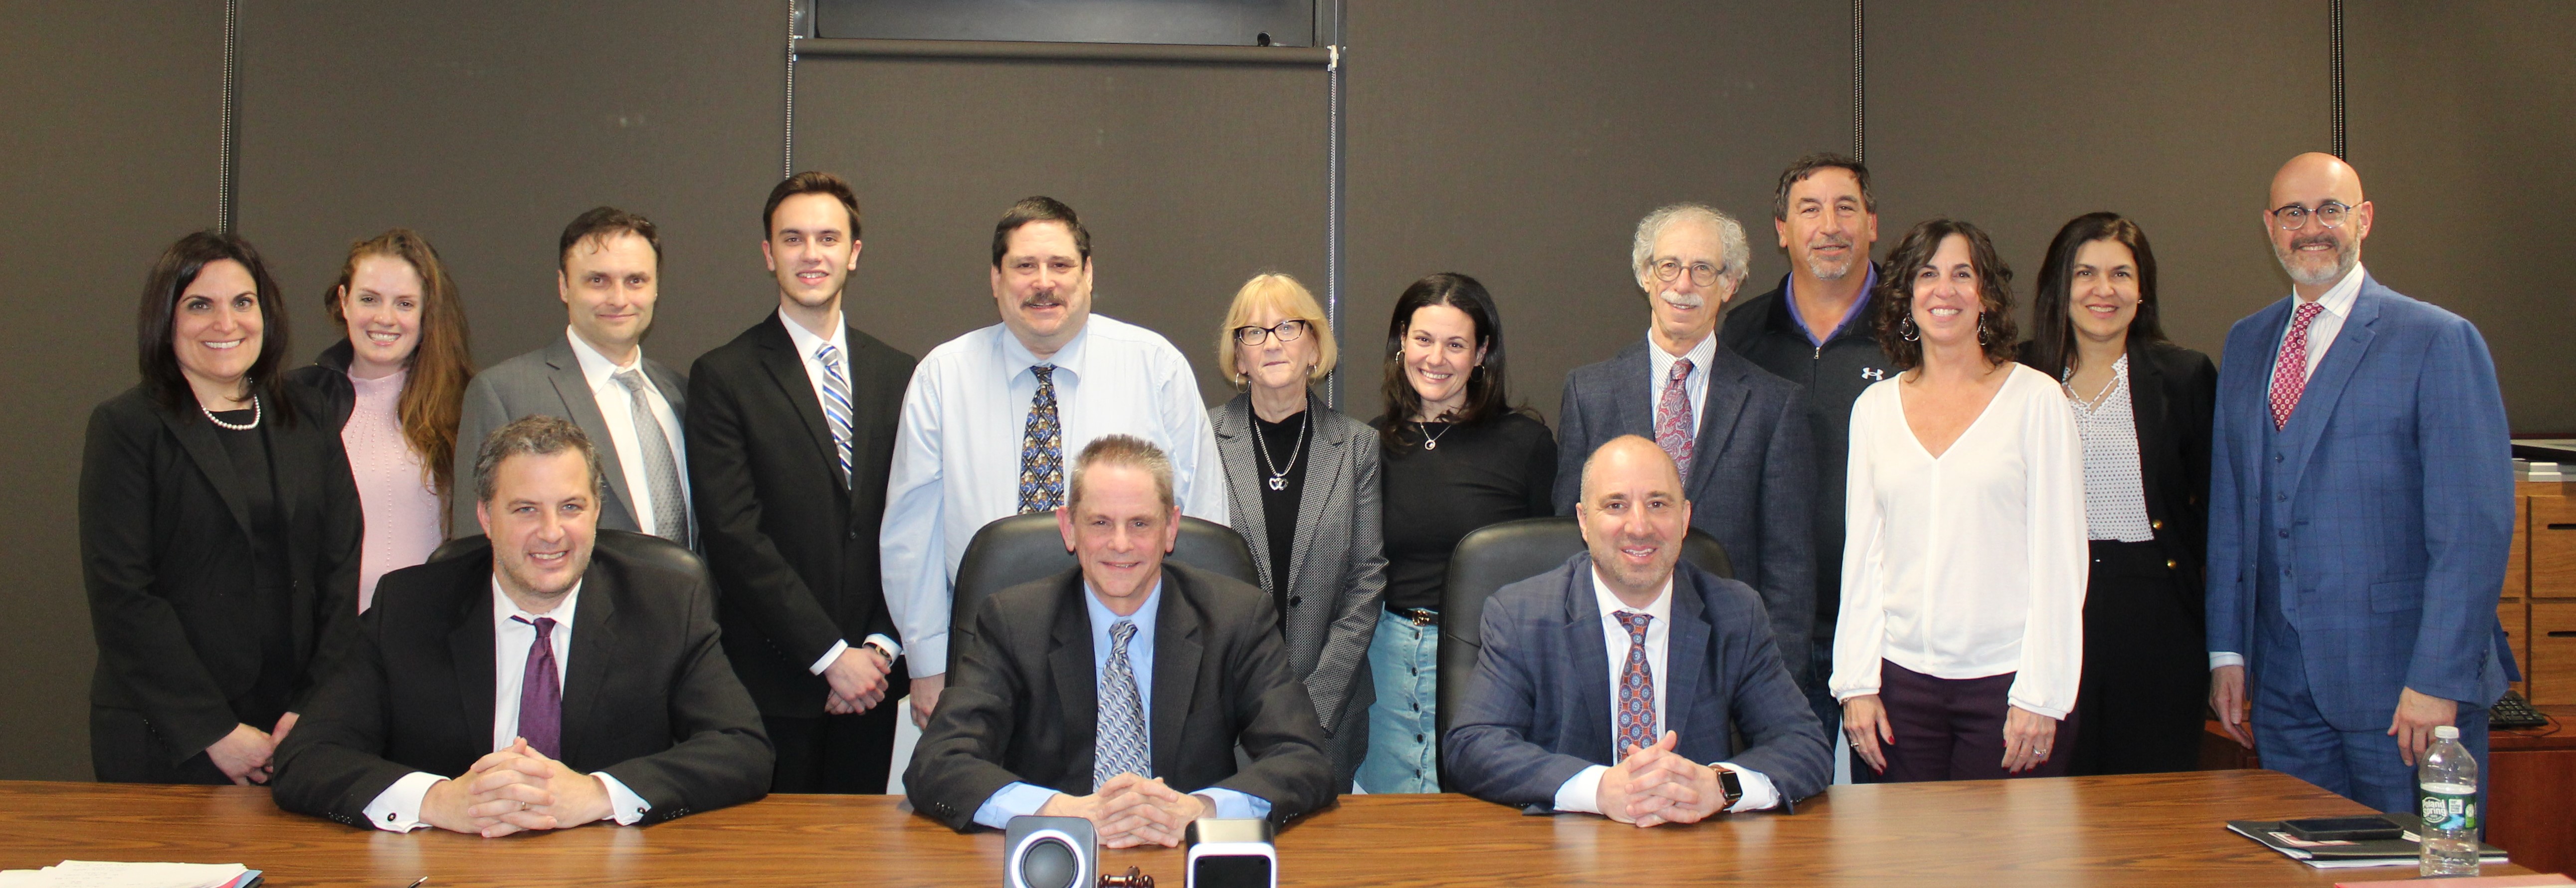 group picture of Fair Lawn Board of Education Trustees and Central Office Administration